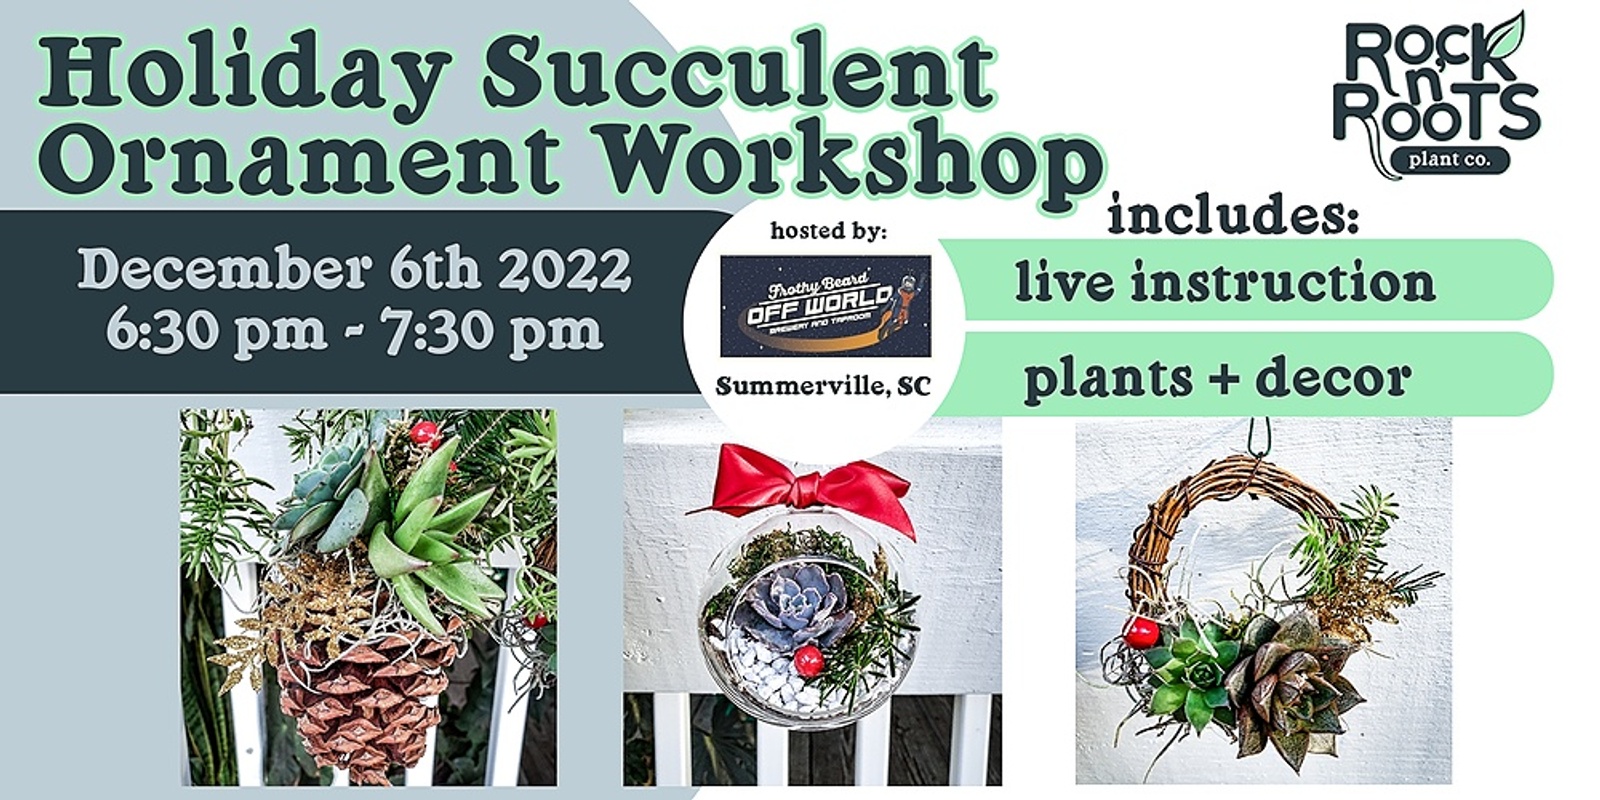 Banner image for Holiday Succulent Ornament Workshop at Frothy Beard Off World (Summerville, SC)